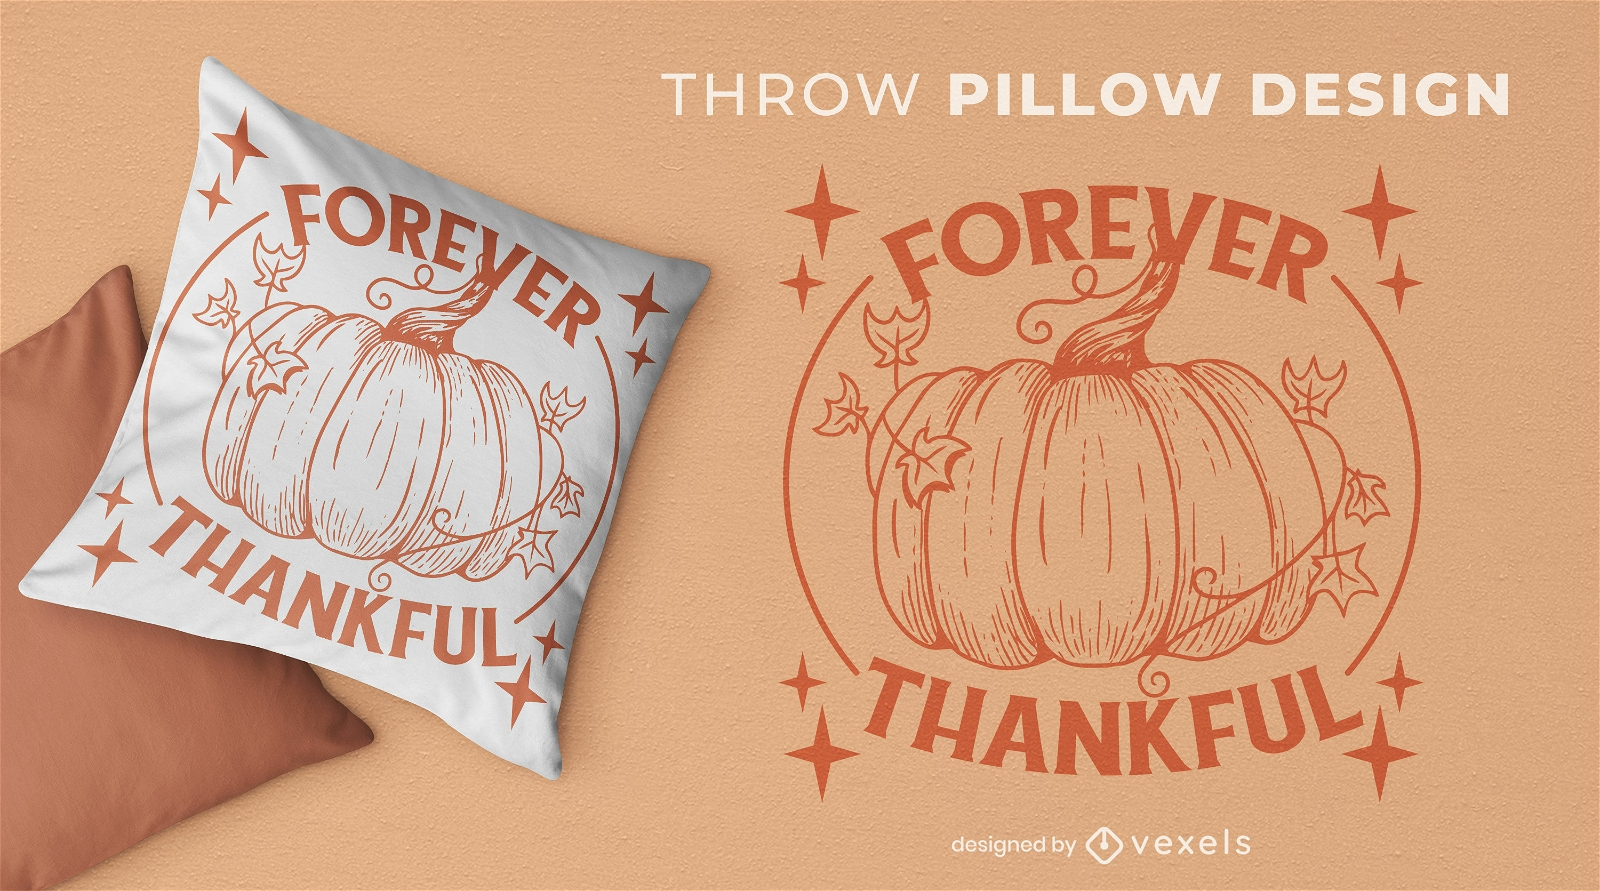 Forever thankful holiday throw pillow design